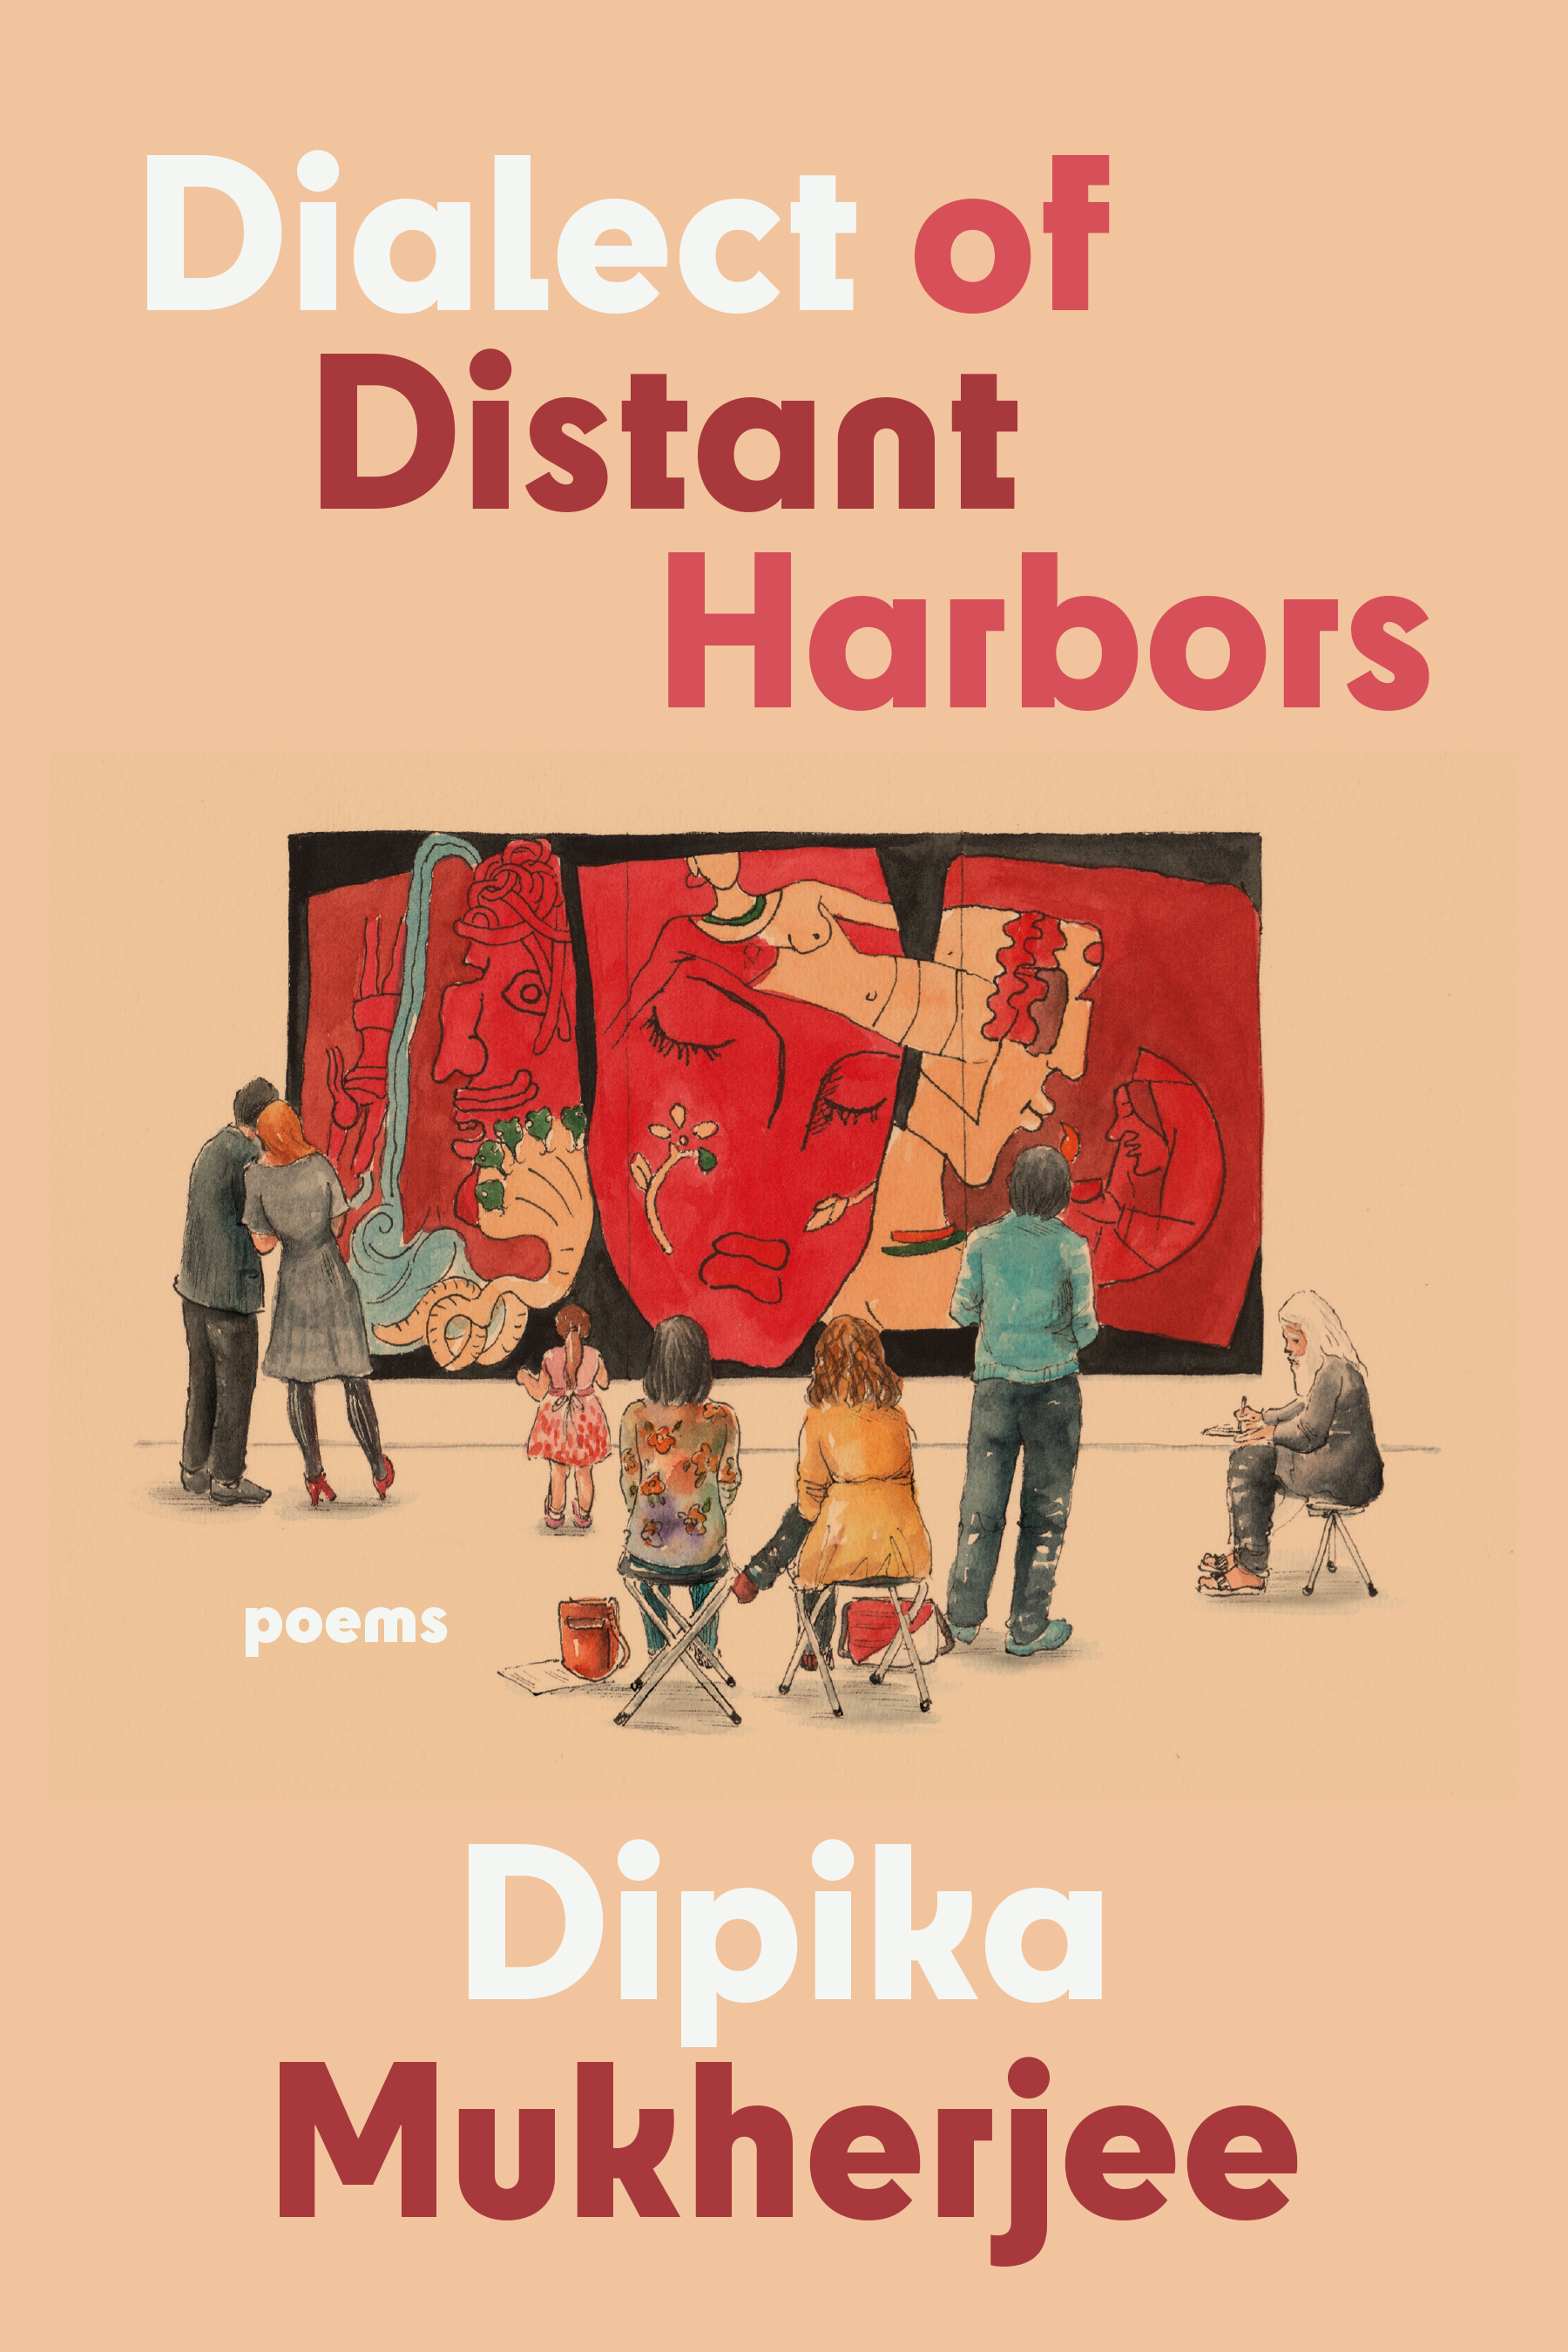 Cover of "Dialect of Distant Harbors" by Dipika Mukherjee